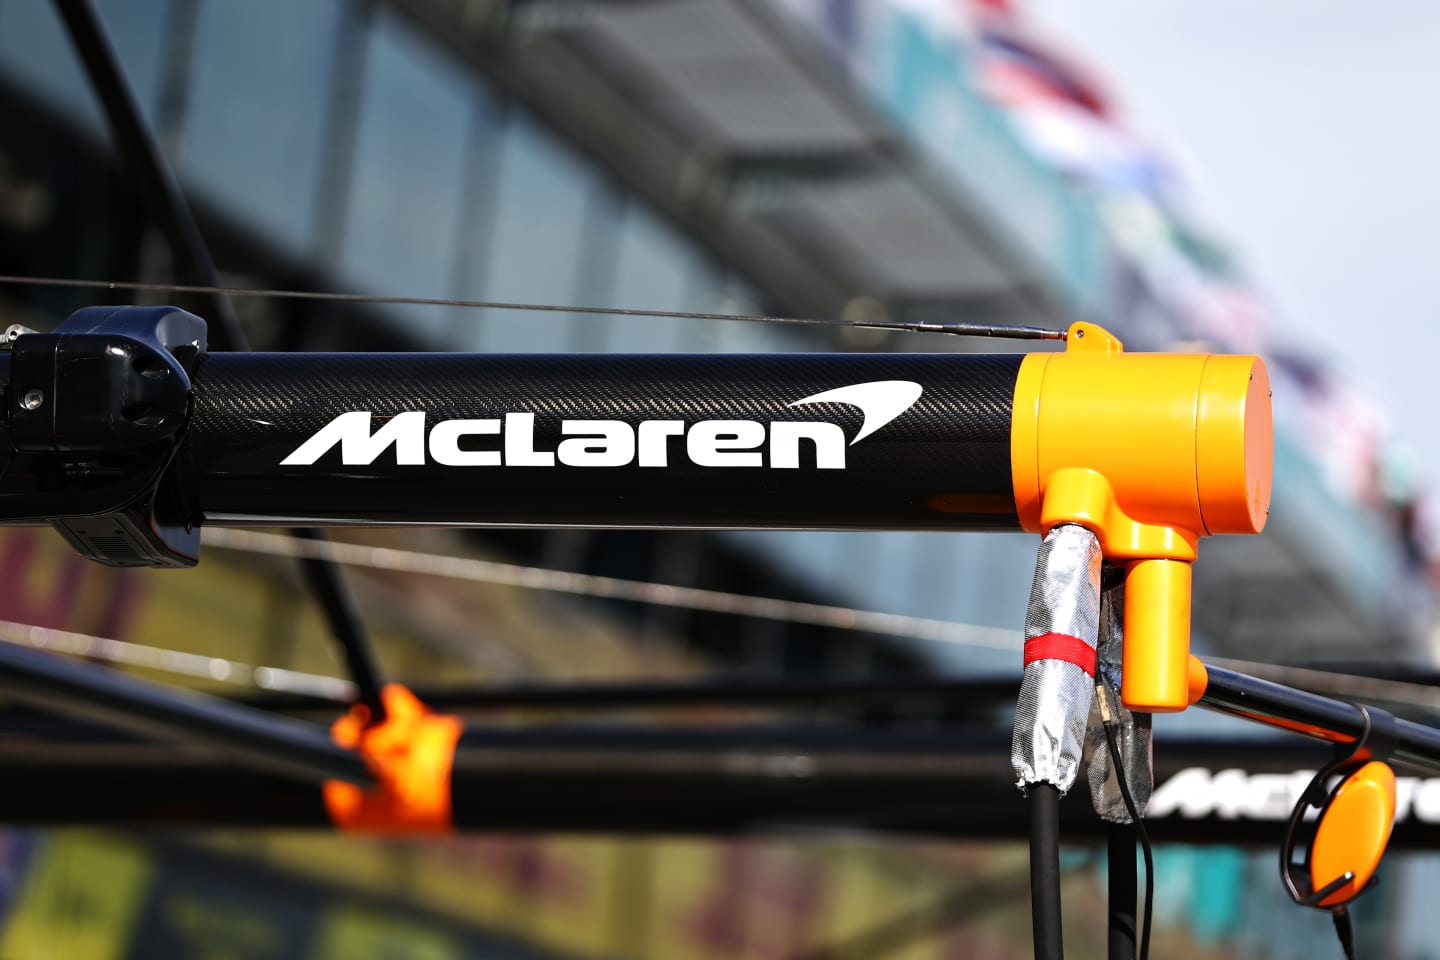 MELBOURNE, AUSTRALIA - MARCH 12: McLaren pitstop equipment is pictured in the Pitlane during